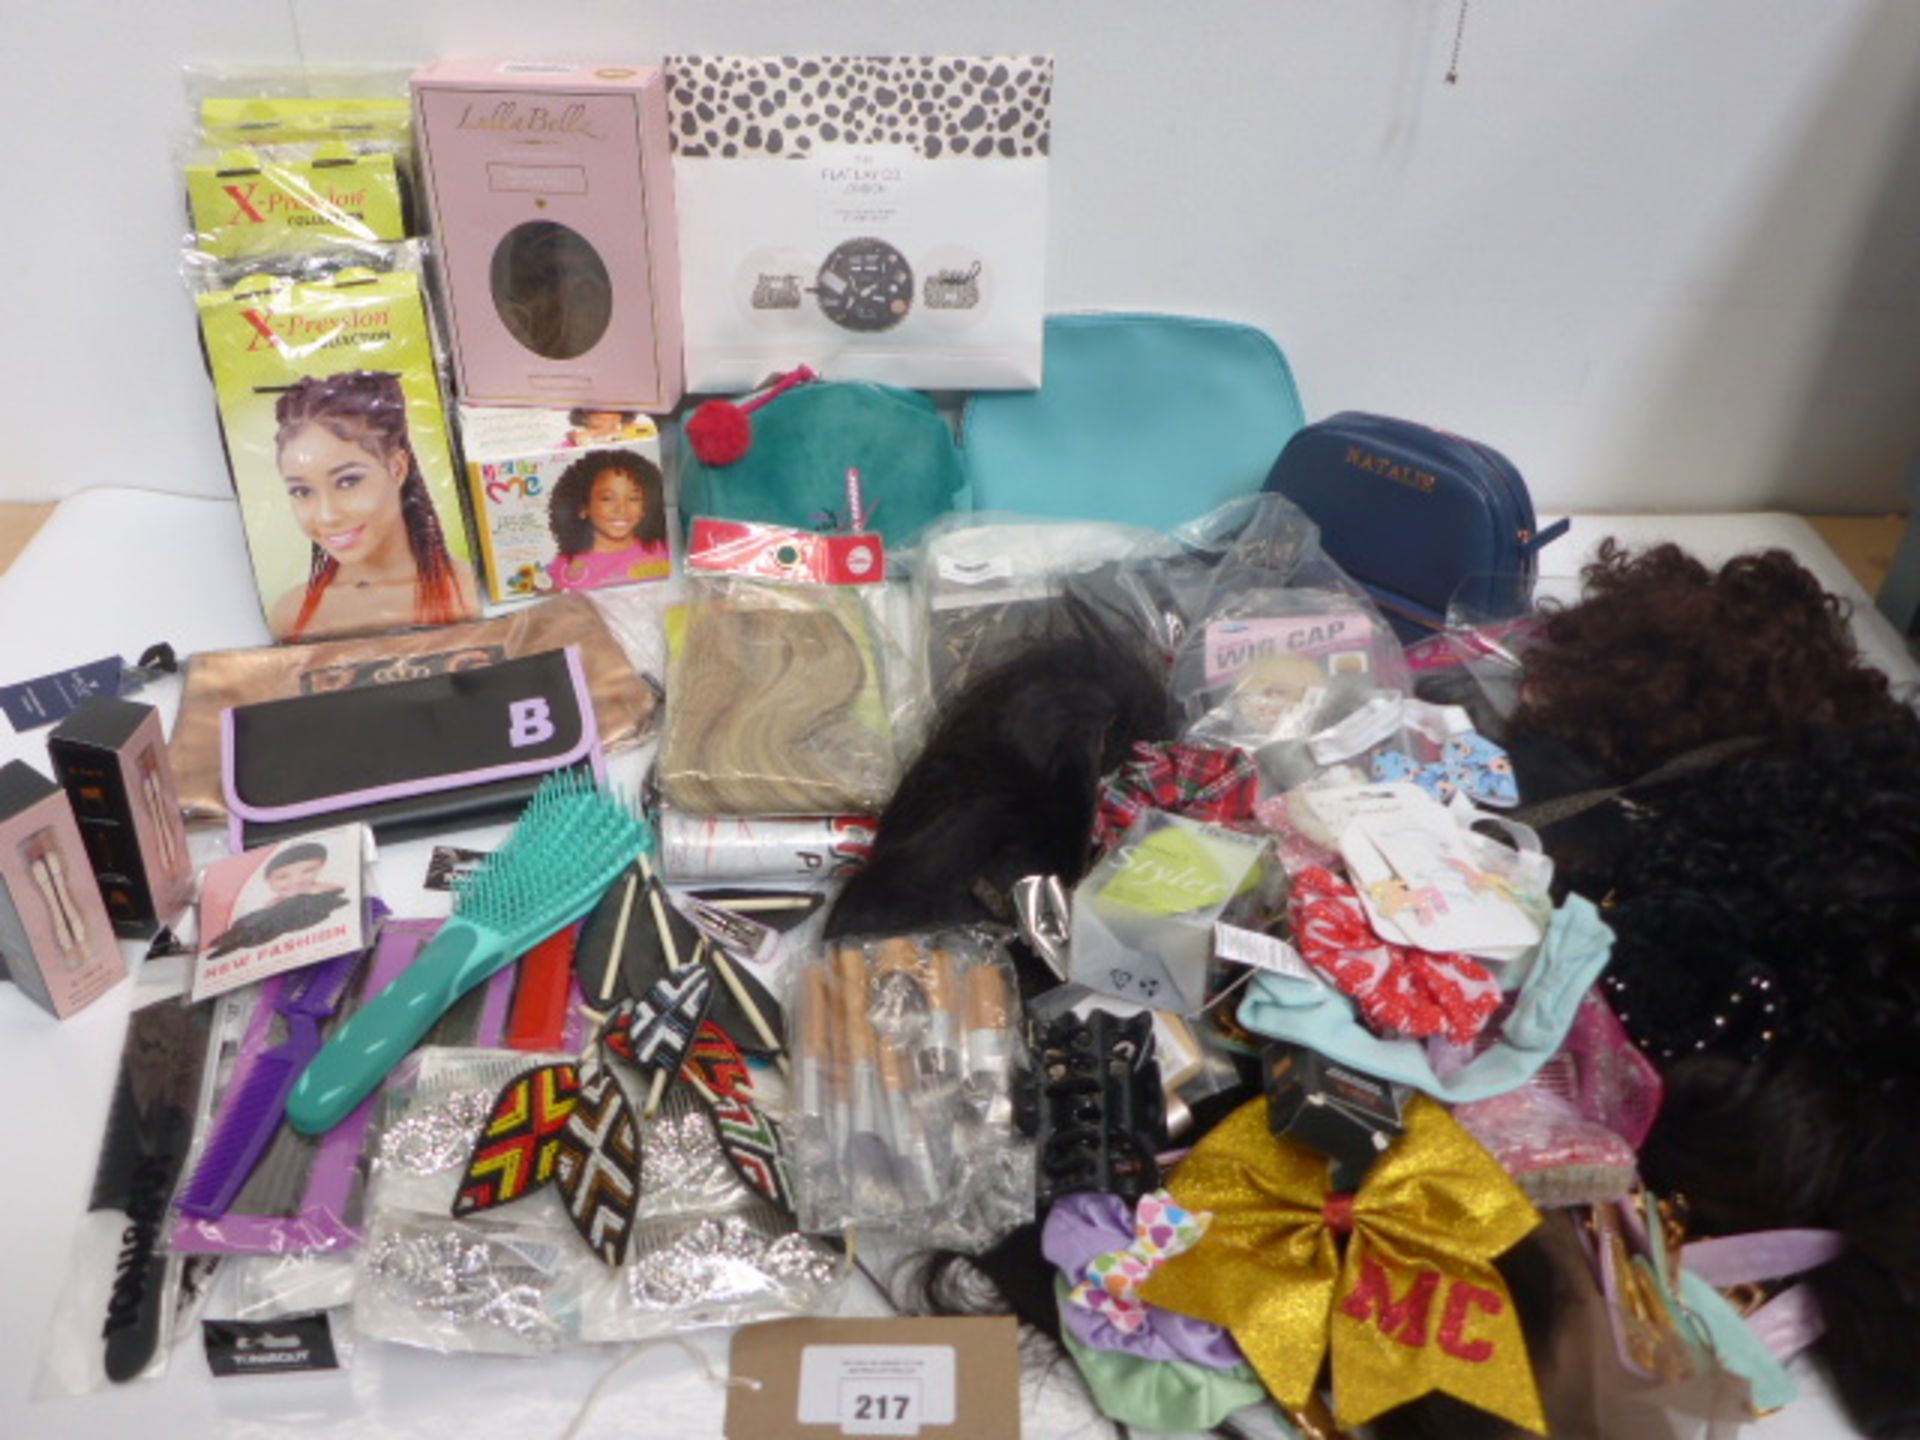 Selection of wigs, hair pieces, hair brushes, decorative hair accessories, makeup bags etc